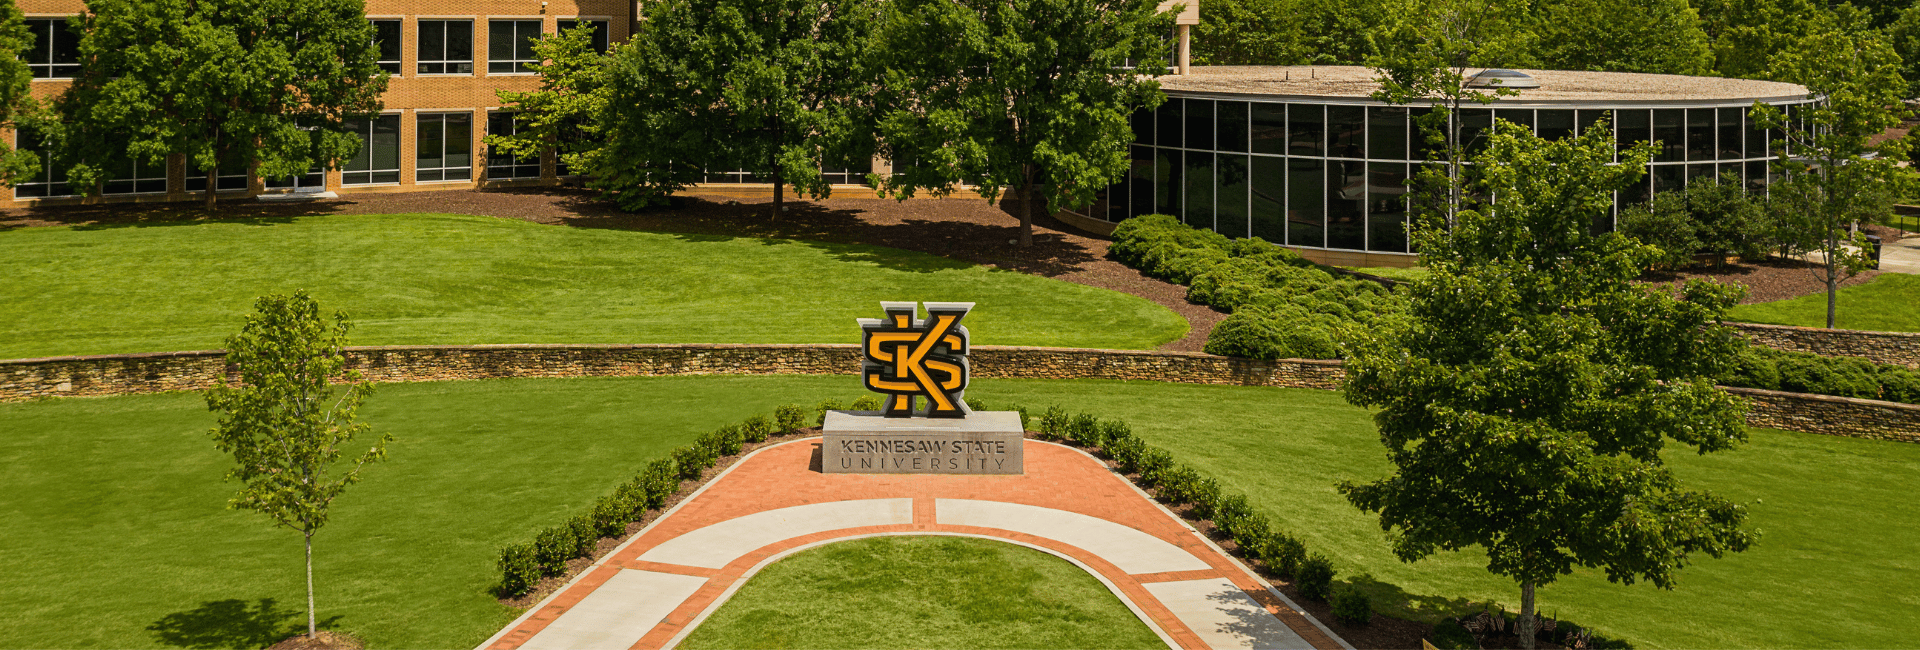 kennesaw state university sign on the green